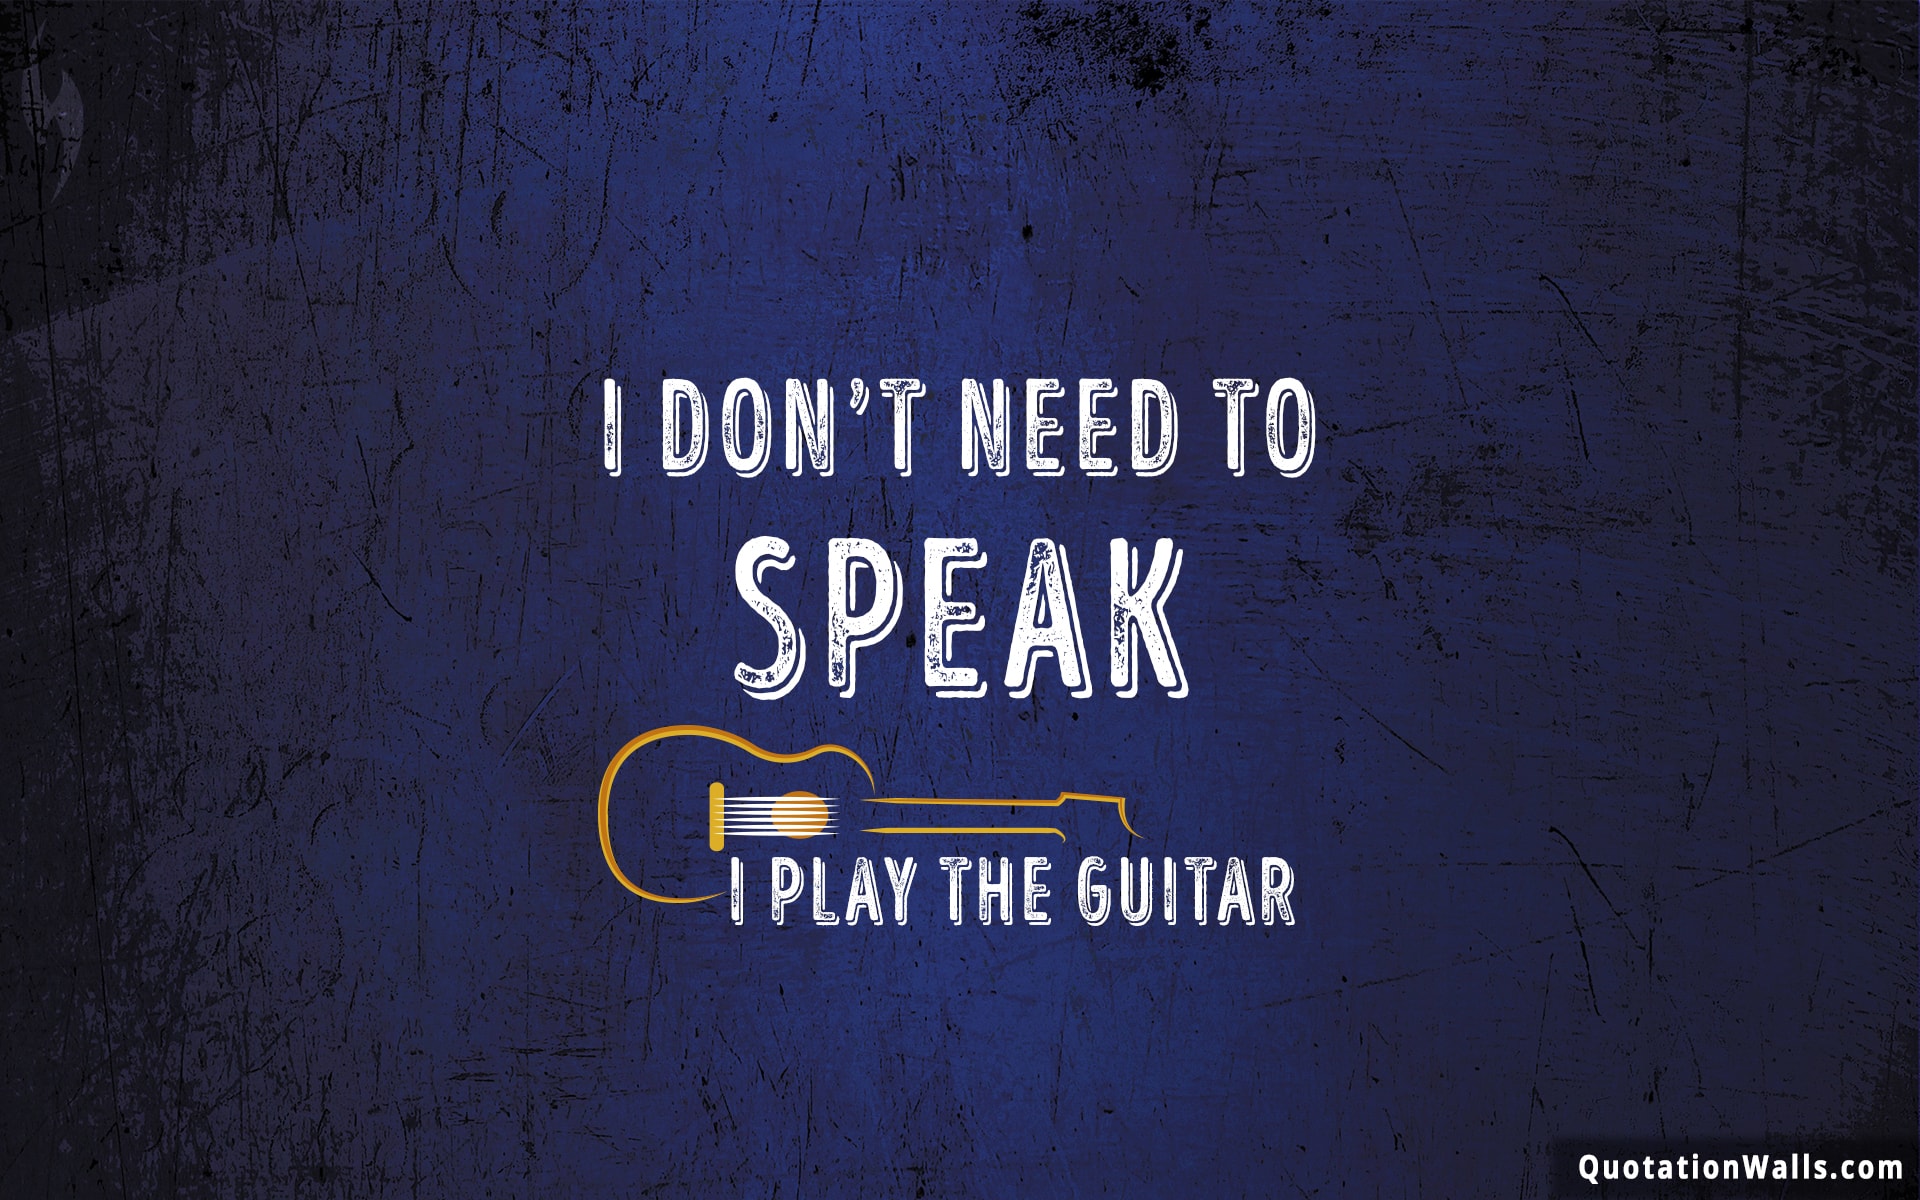 I Play Guitar Wallpaper For Desktop - Guitar Wallpaper For Mobile With Quotes For Boys , HD Wallpaper & Backgrounds